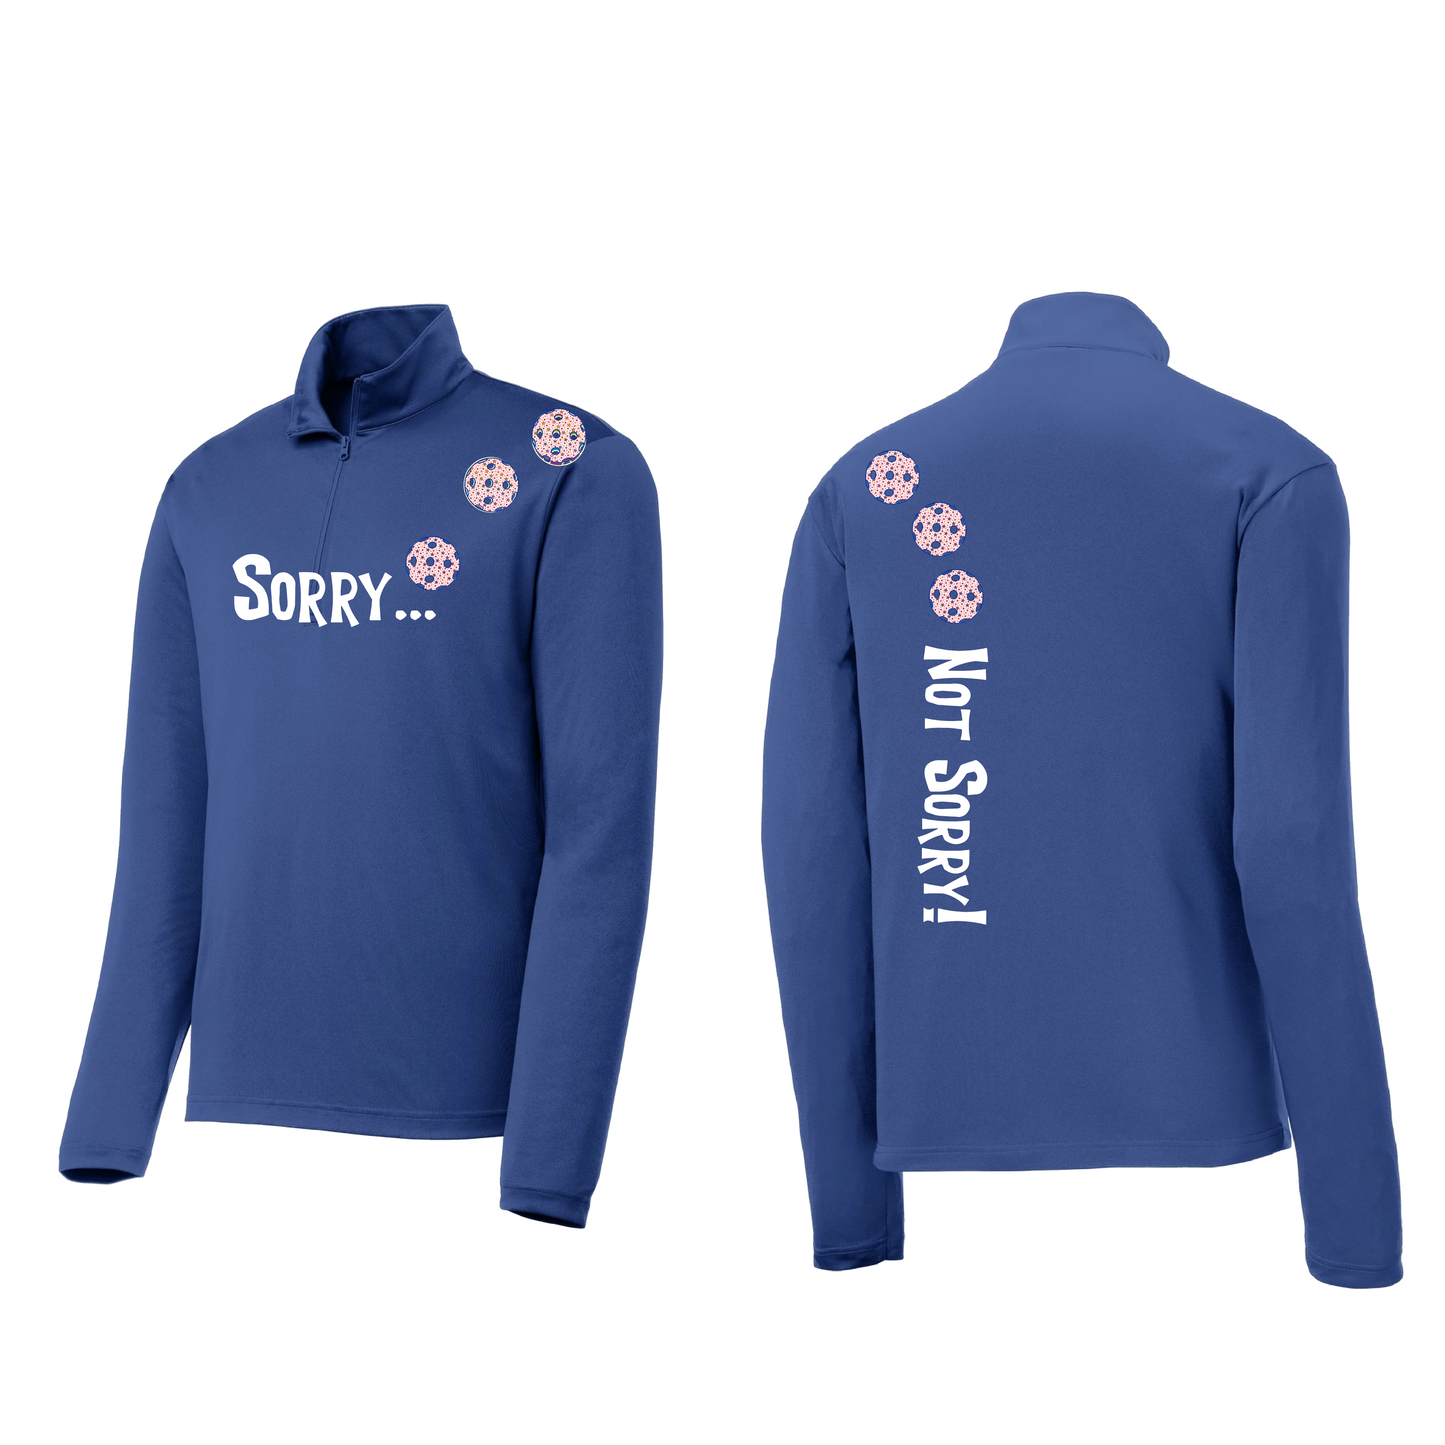 Sorry Not Sorry With Pickleballs (Cyan Orange Purple Stars) | Men's 1/4 Zip Long Sleeve Pullover Athletic Shirt | 100% Polyester